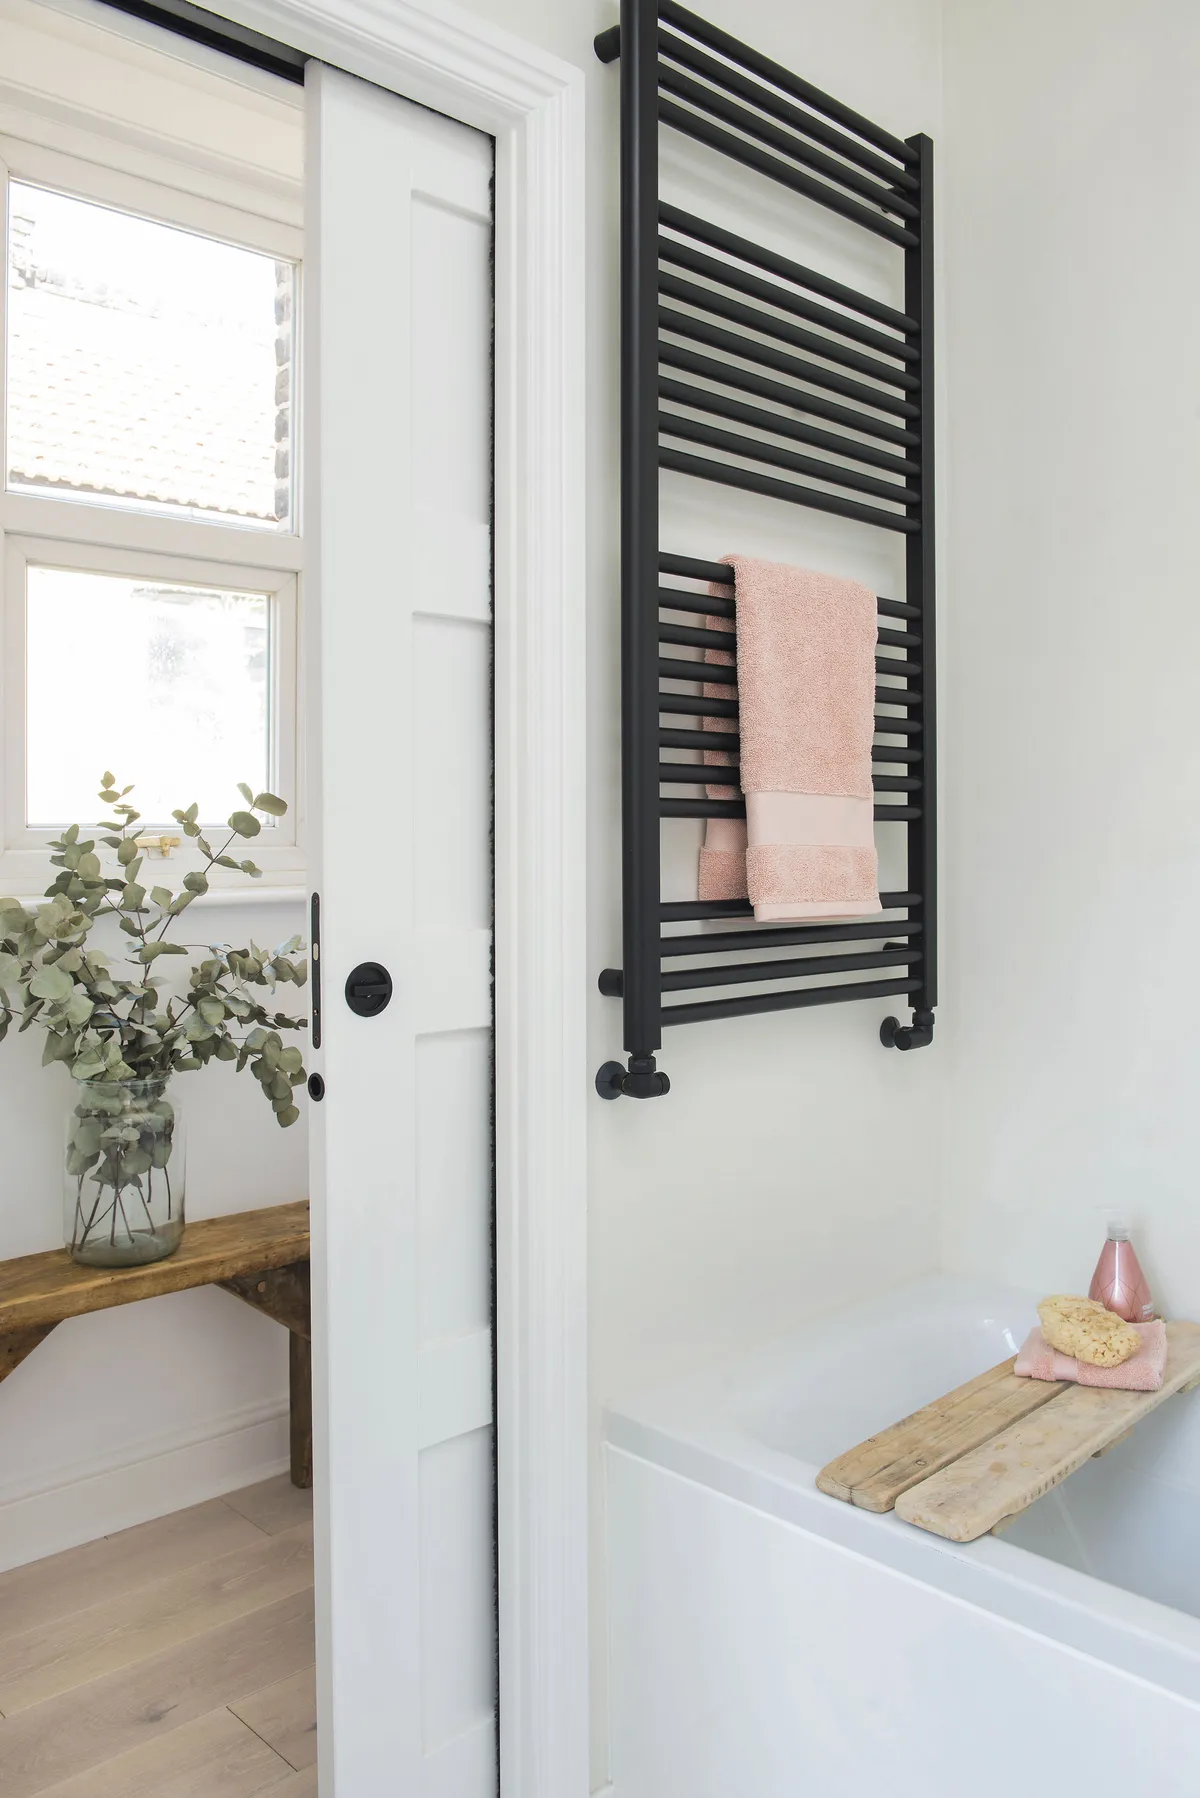 ‘The door from the kitchen straight into the bathroom wasn’t ideal, but creating the passage solved the problem,’ says Sina. ‘The pocket door is great – it’s stylish and a brilliant space-saver’